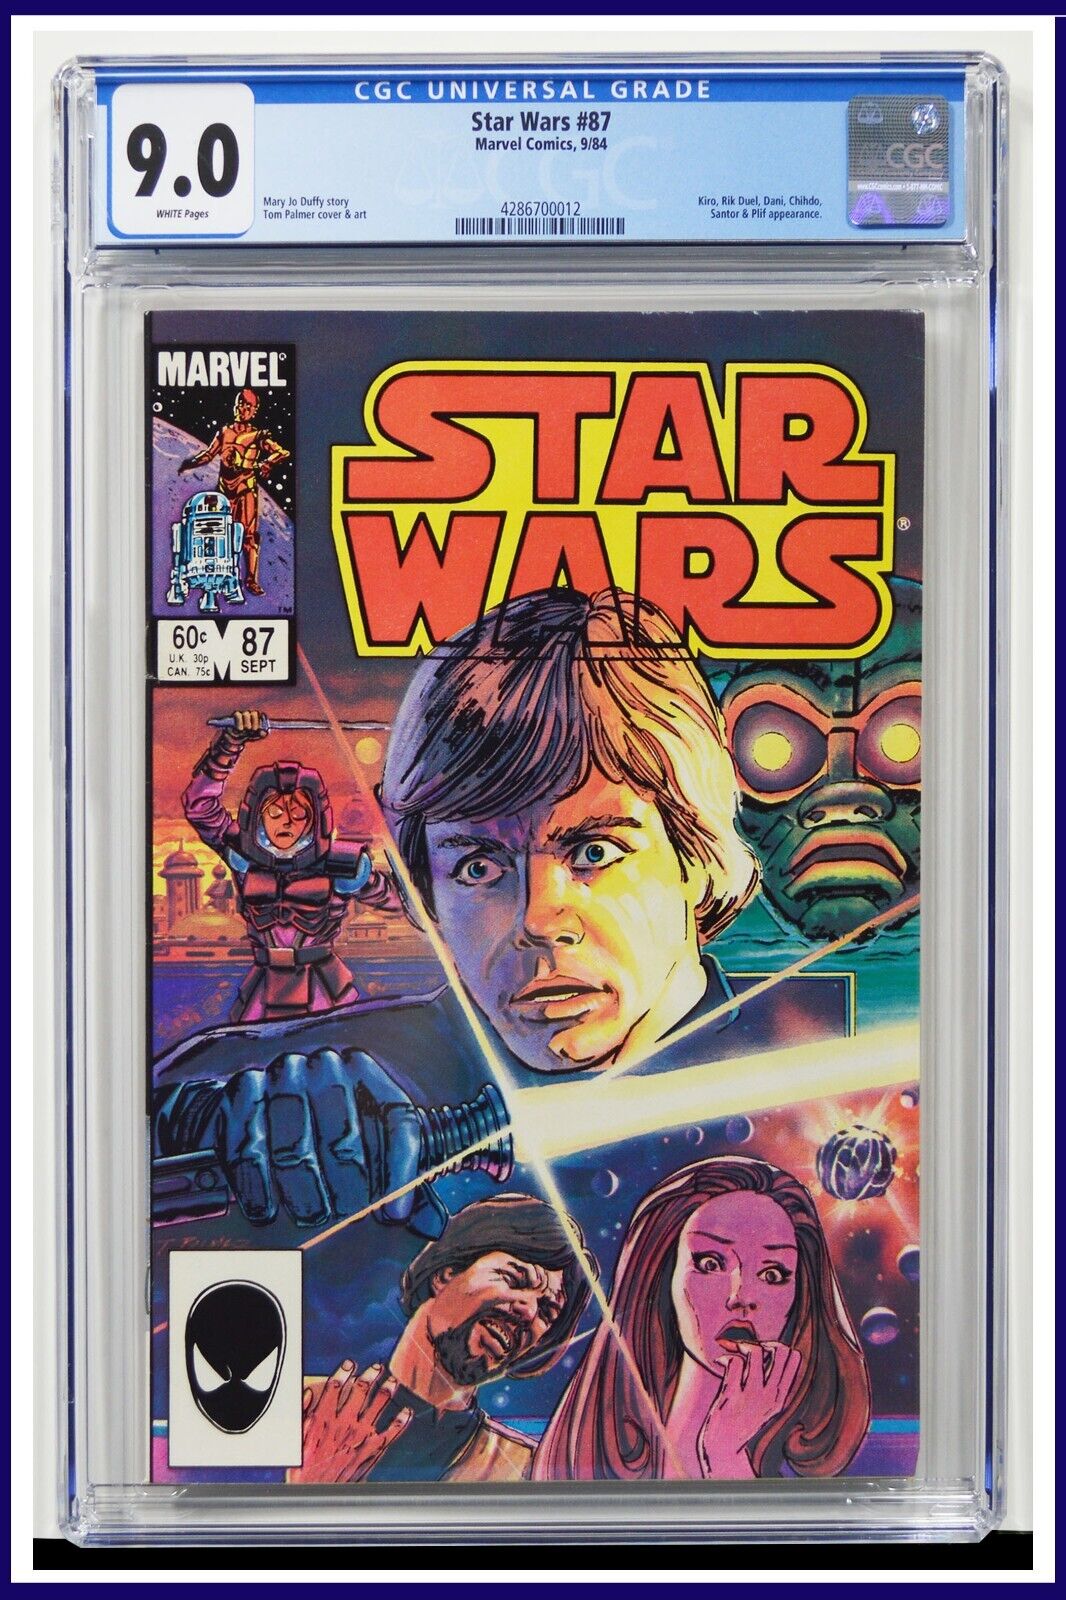 Star Wars #87 CGC Graded 9.0 Marvel September 1984 White Pages Comic Book.